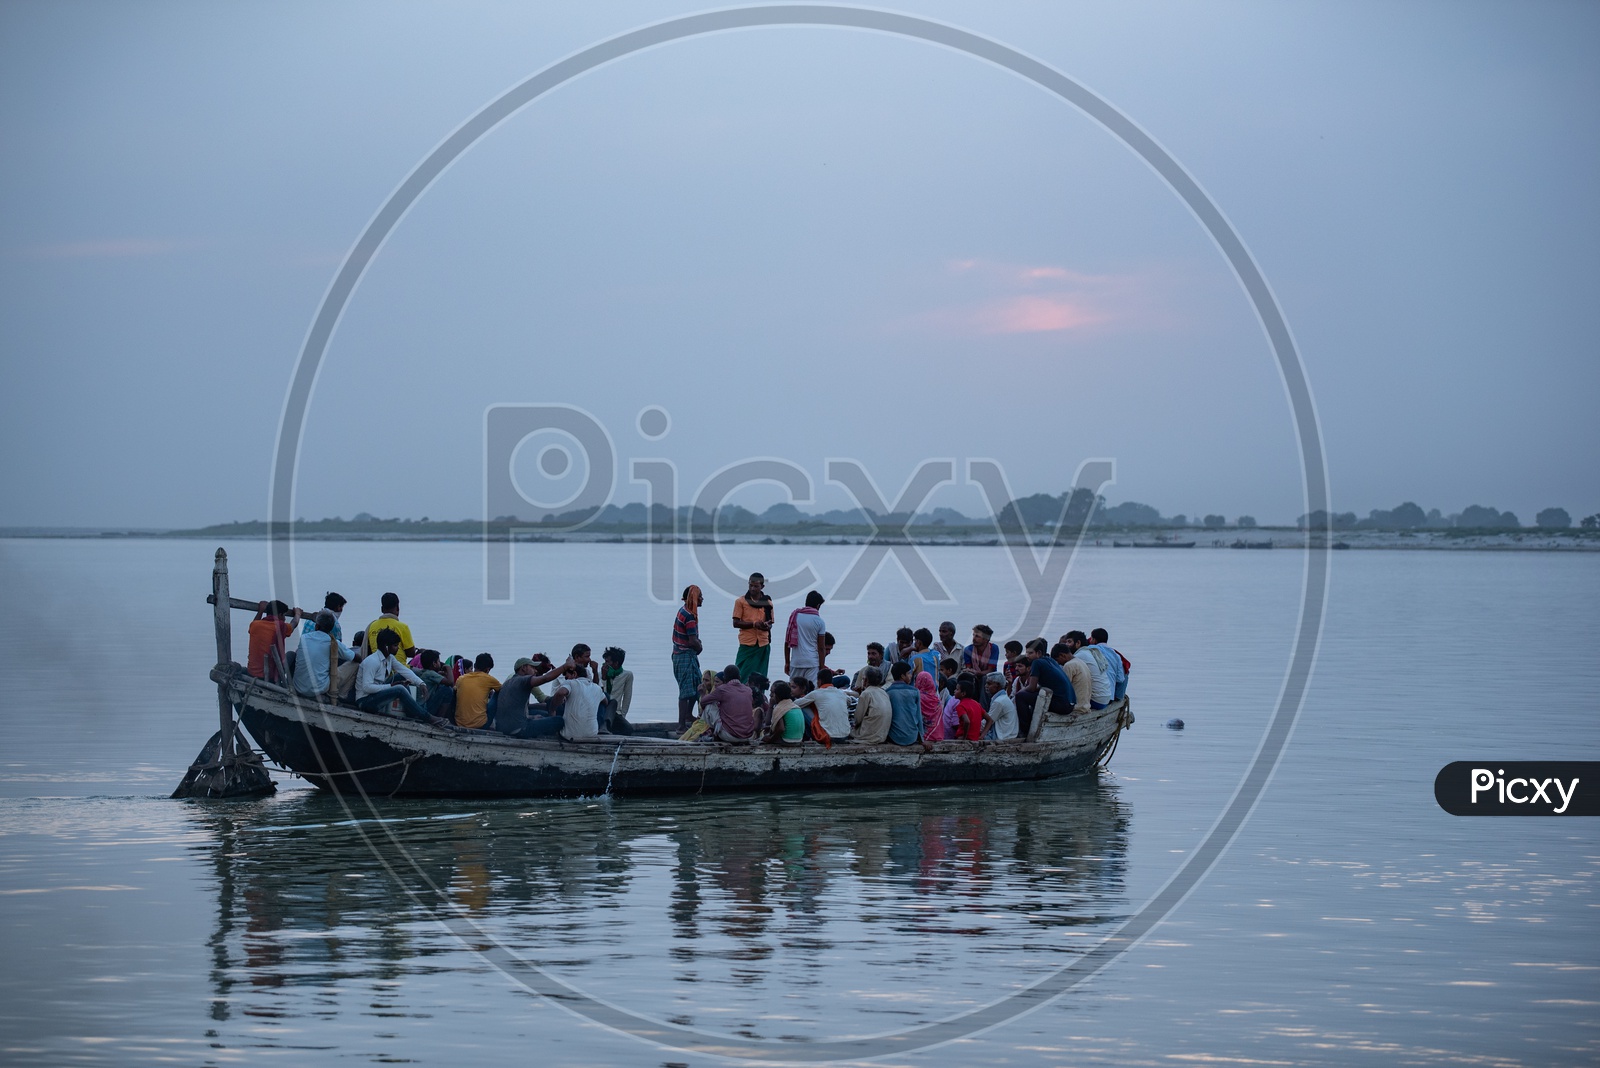 Local People Commuting In The Boats  on Ganga River